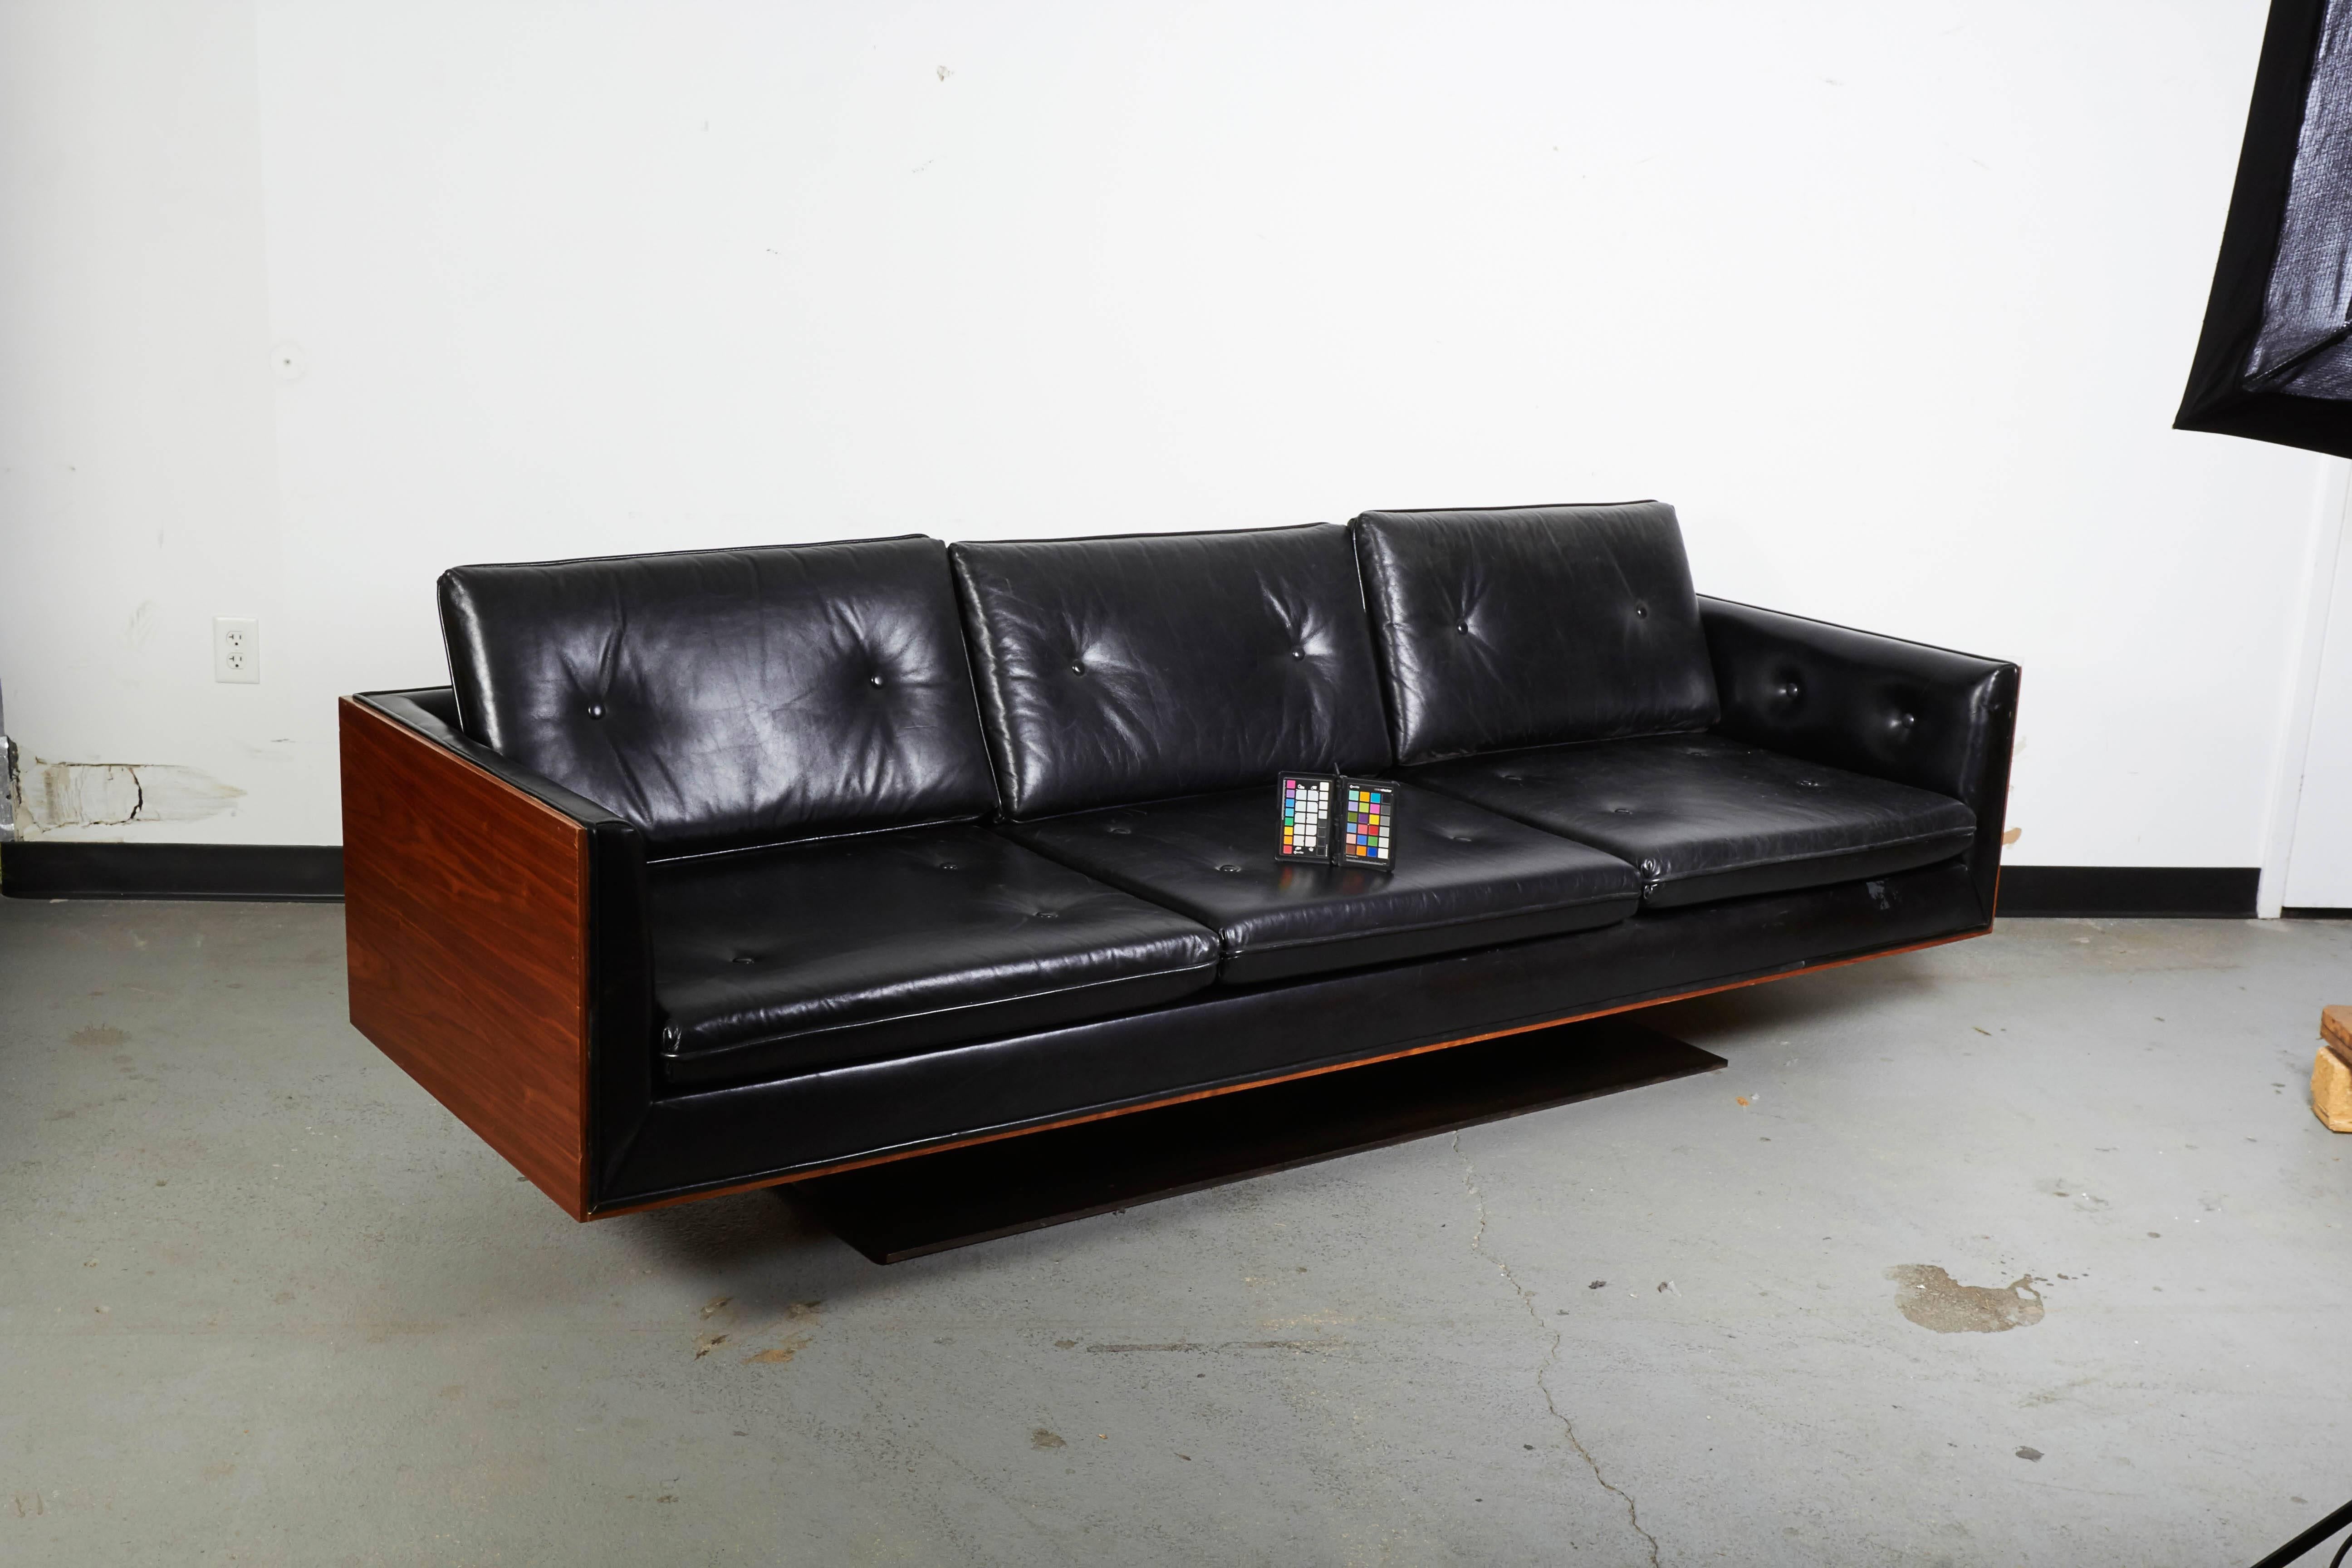 Apparently original navy blue leather upholstered sofa with tufted seat and back cushions within a bookmatched walnut veneered back and sides; raised on a steel platform to make this an early version of a floating sofa.